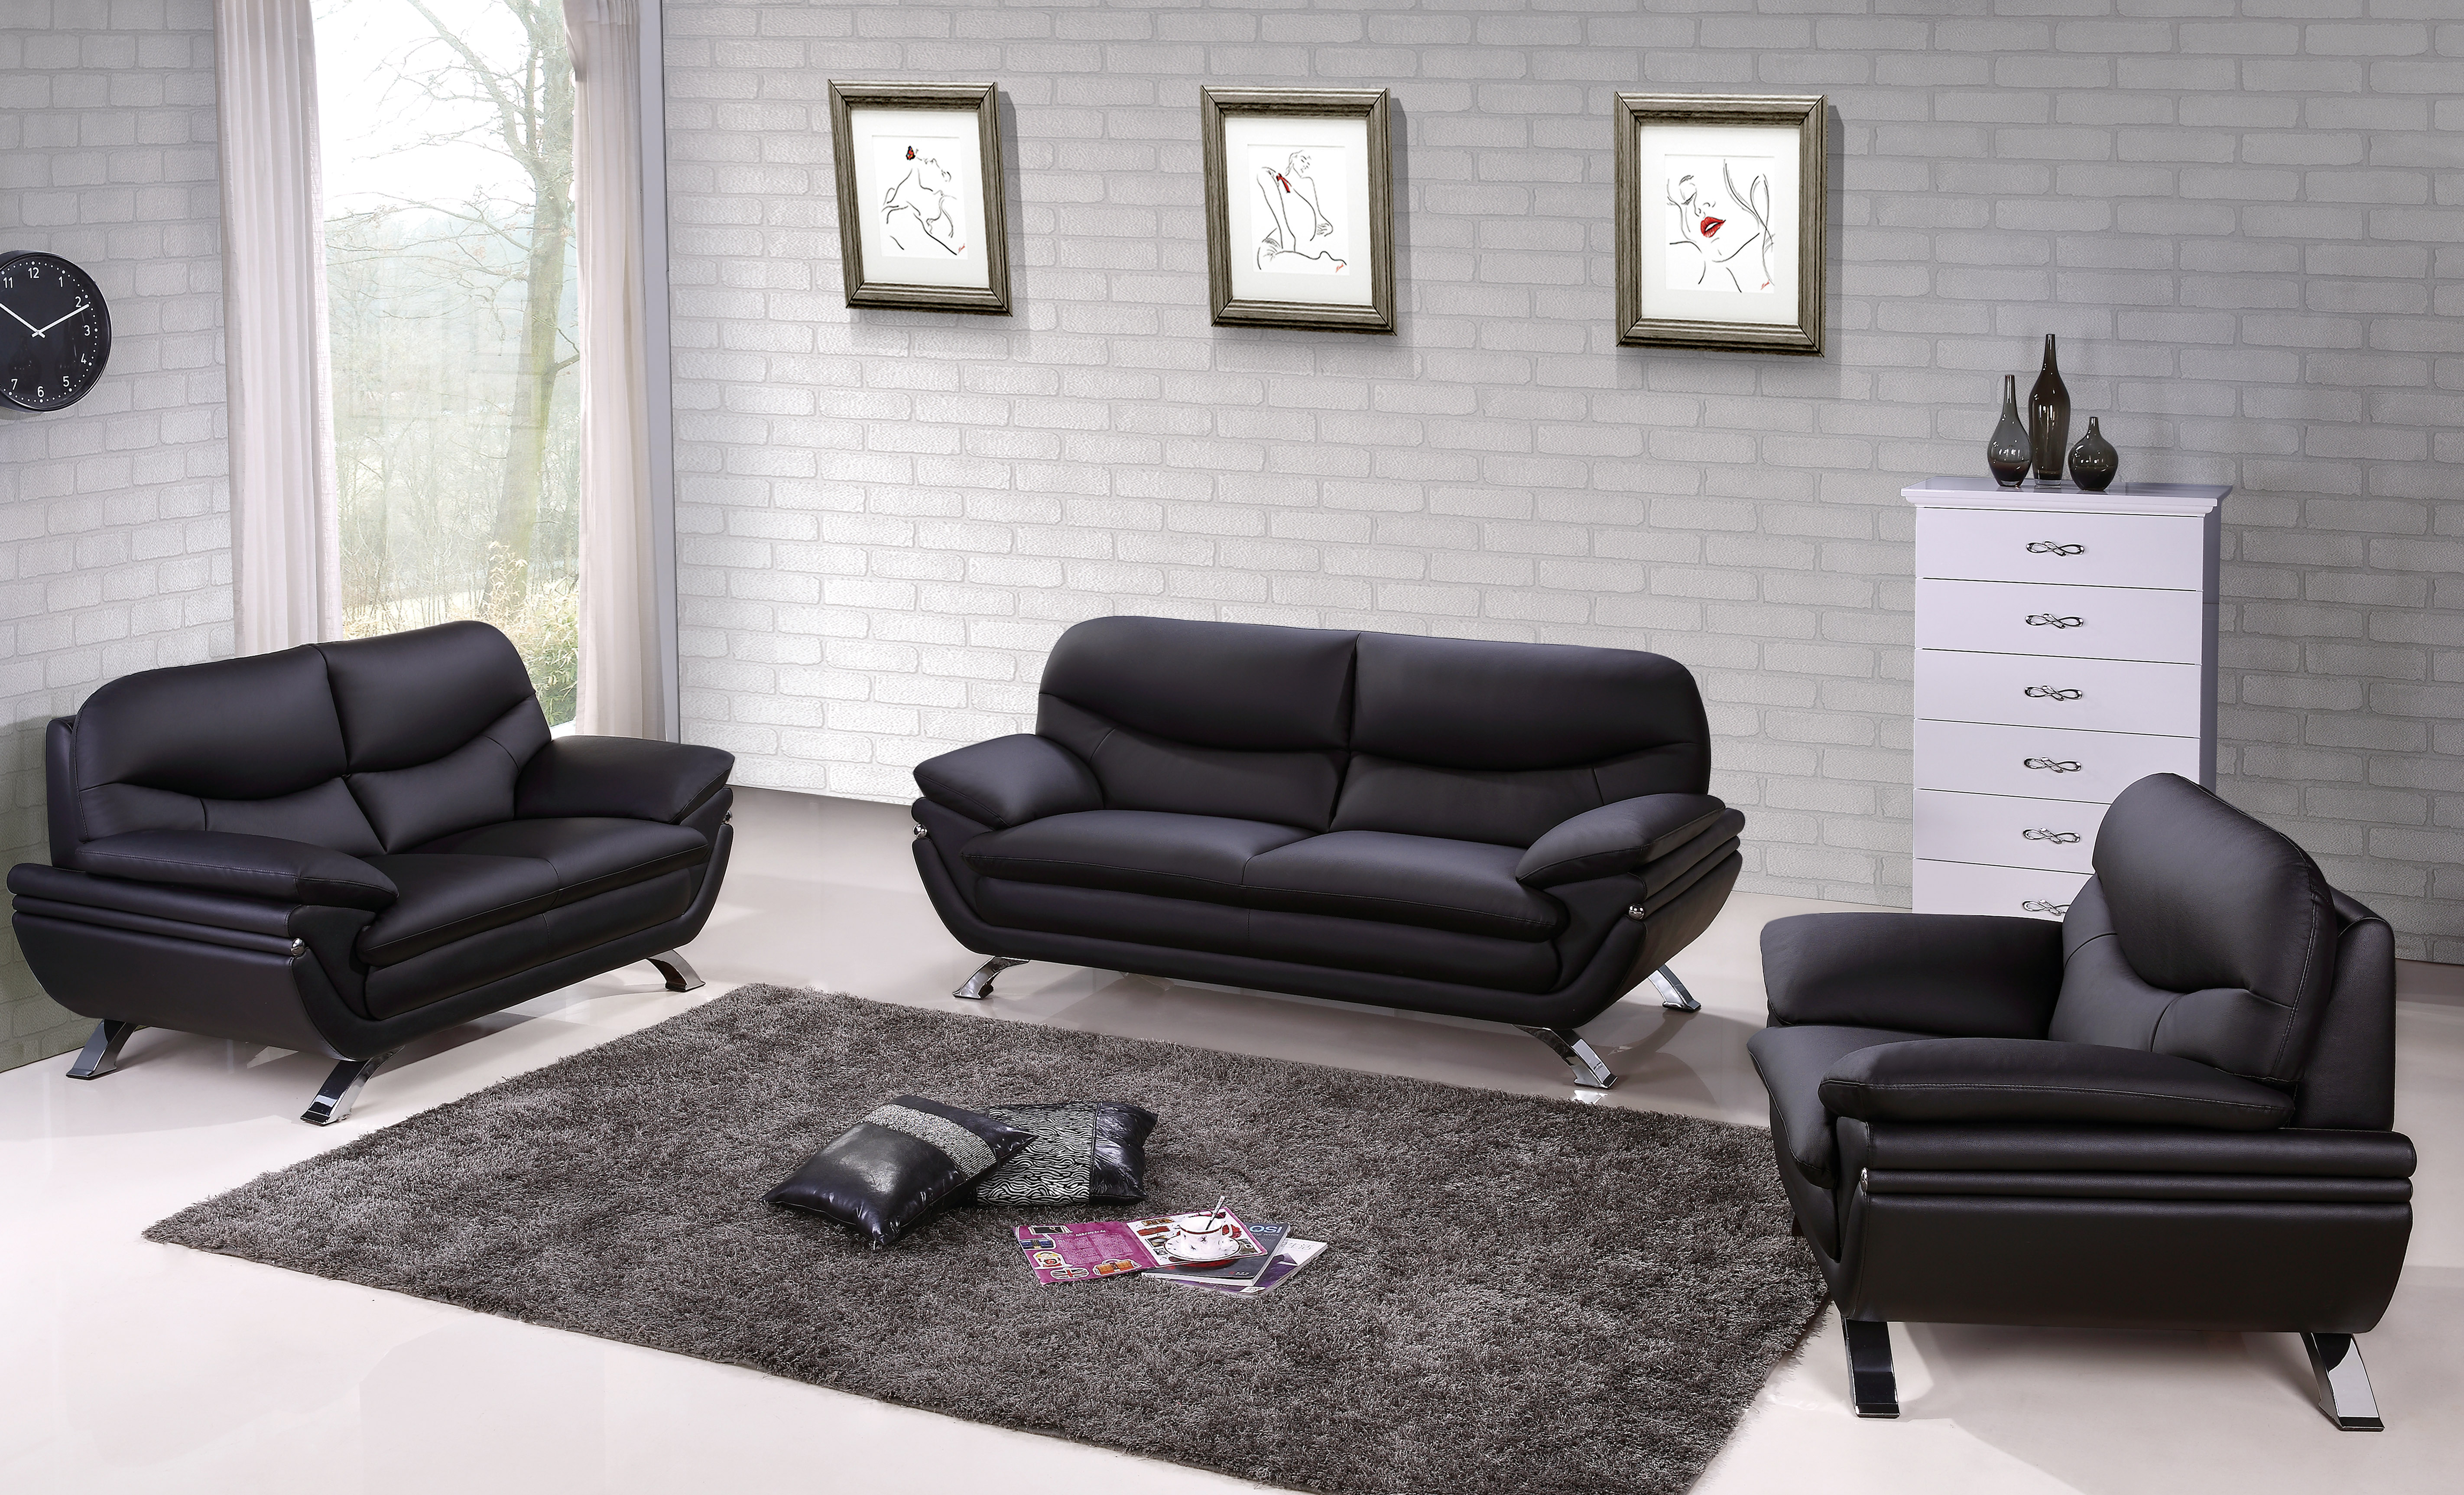 Harmony Ying Yang Contemporary Leather Living Room Sofa Set Memphis